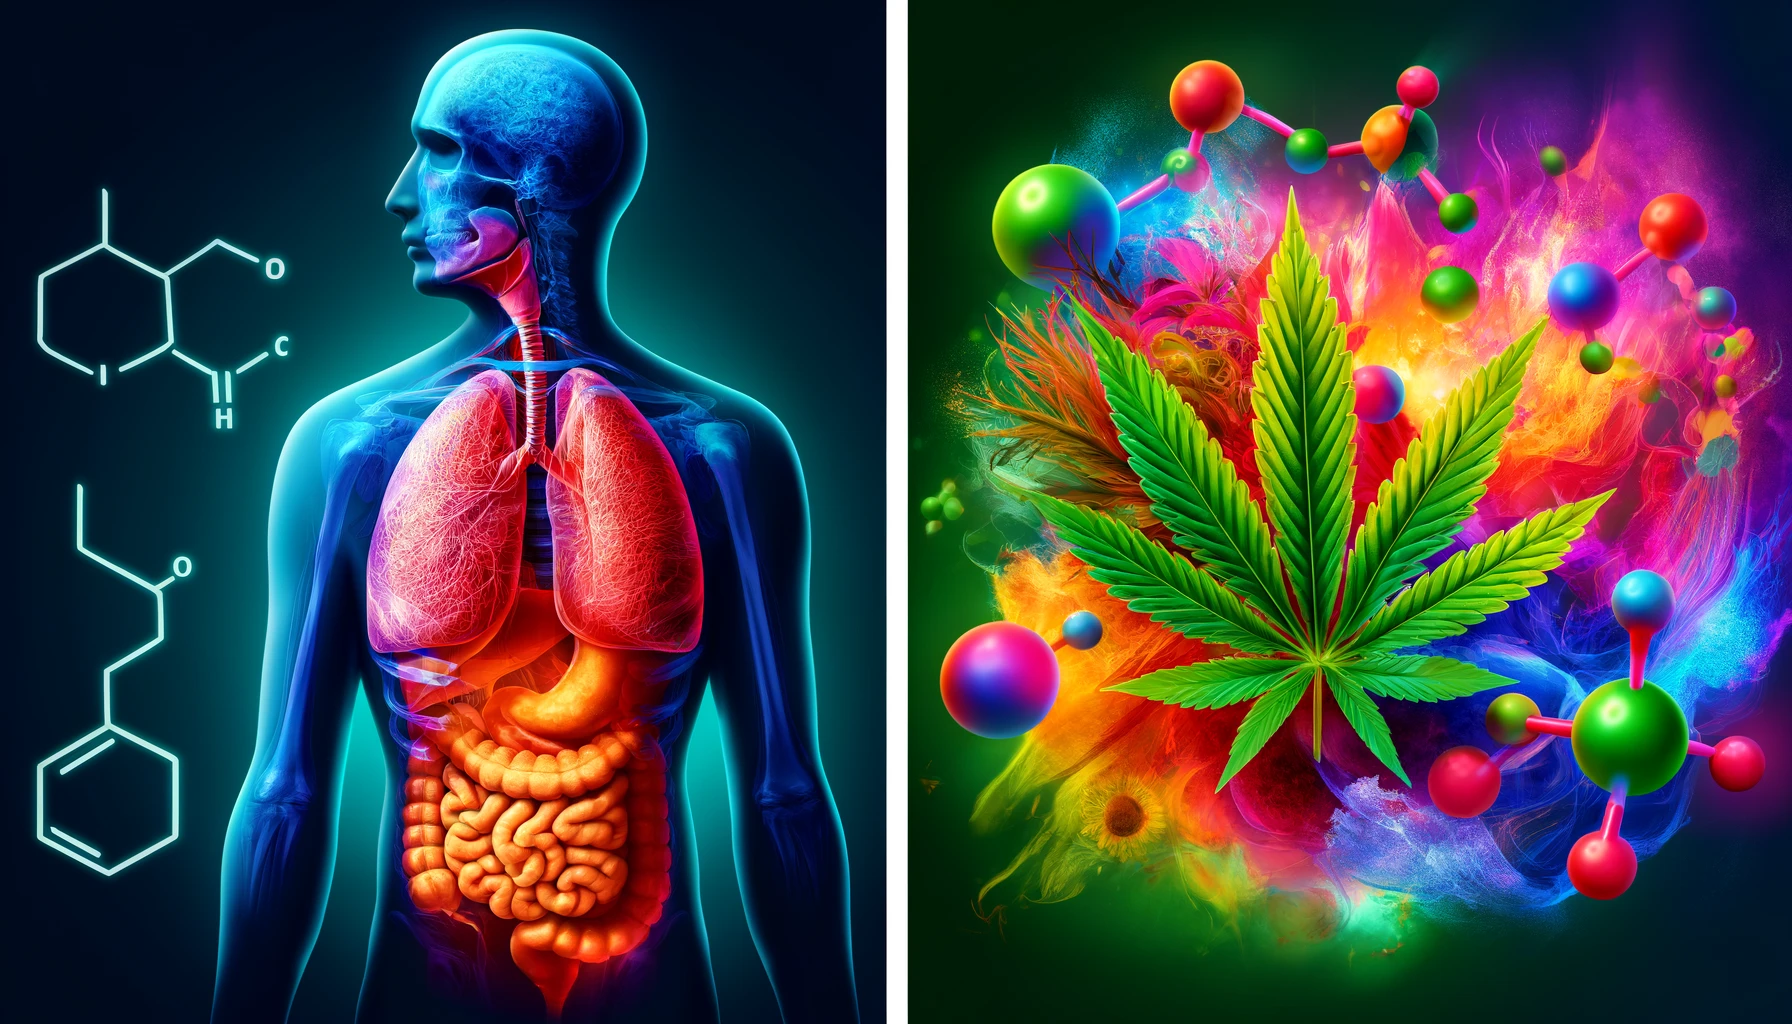 An illustrative comparison of natural cannabinoid delivery with human anatomy and molecular interaction, showcasing a vivid cannabis leaf and colorful, abstract molecular structures.